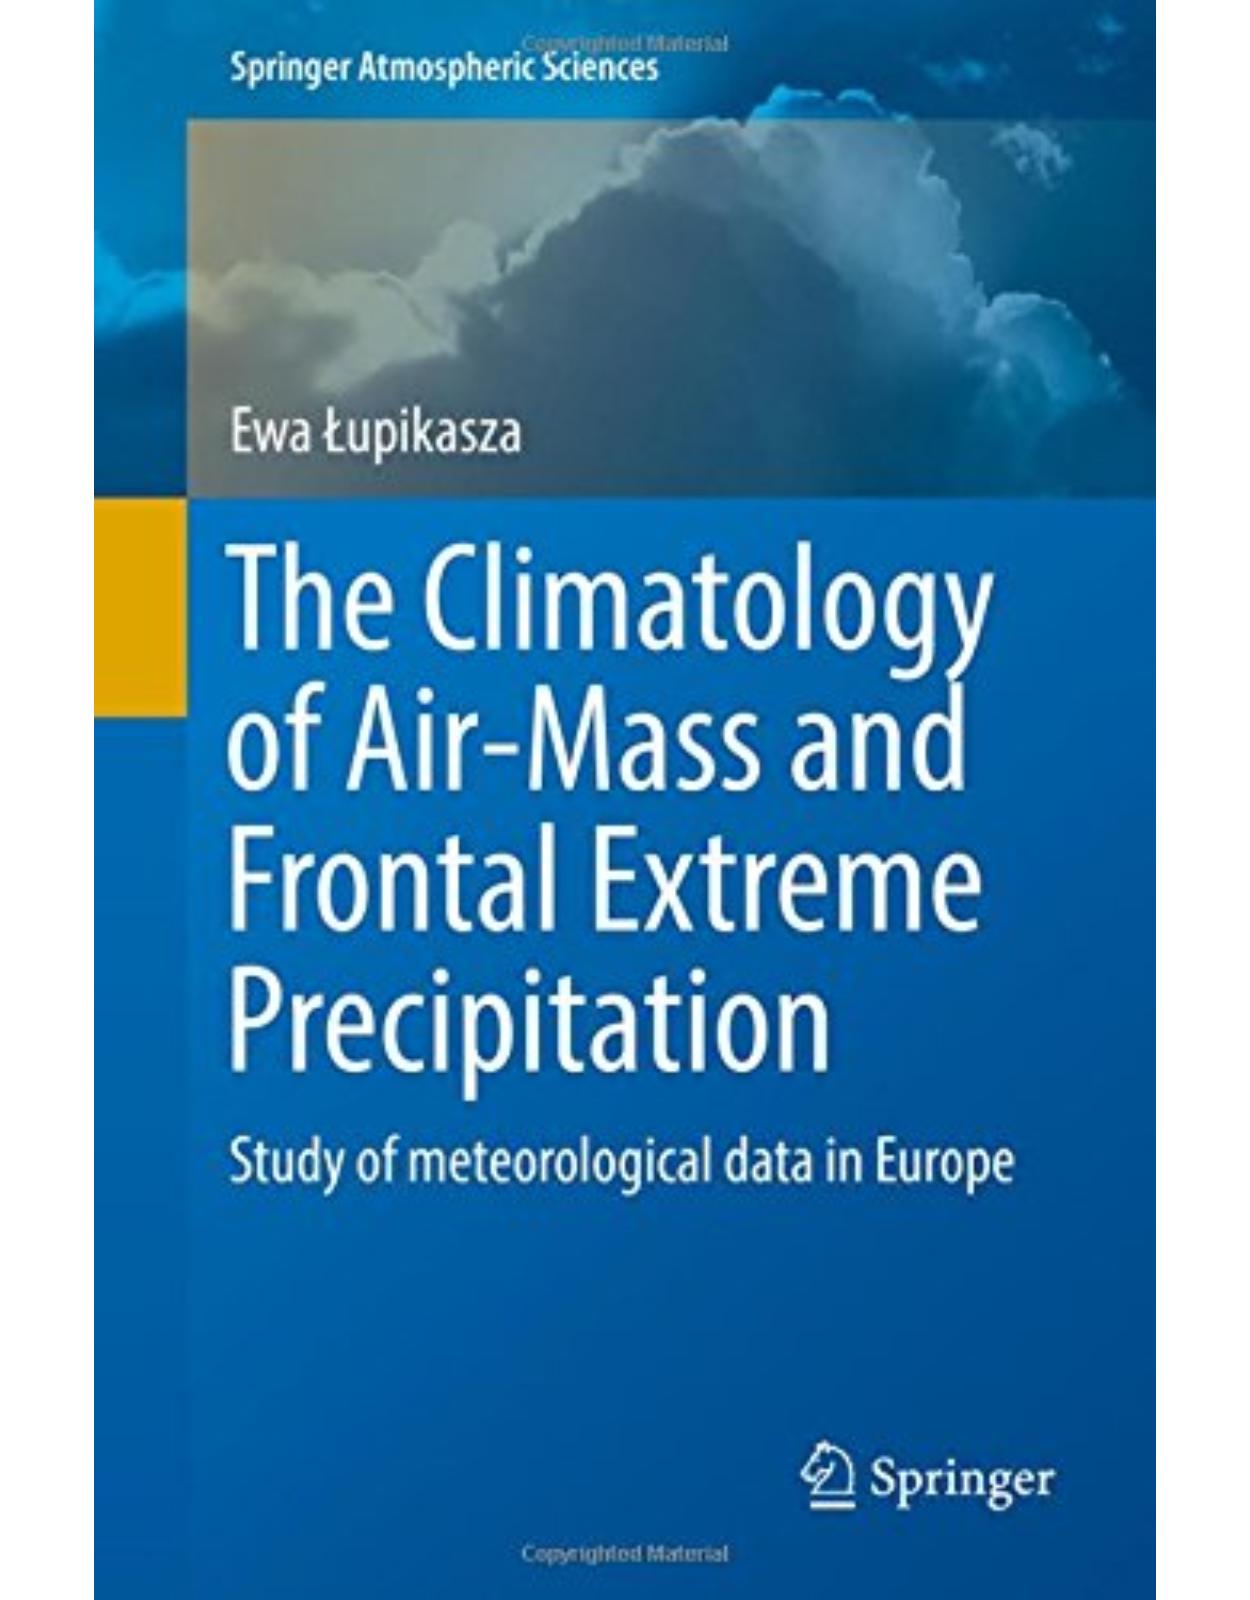 The Climatology of Air-Mass and Frontal Extreme Precipitation: Study of meteorological data in Europe (Springer Atmospheric Sciences) 